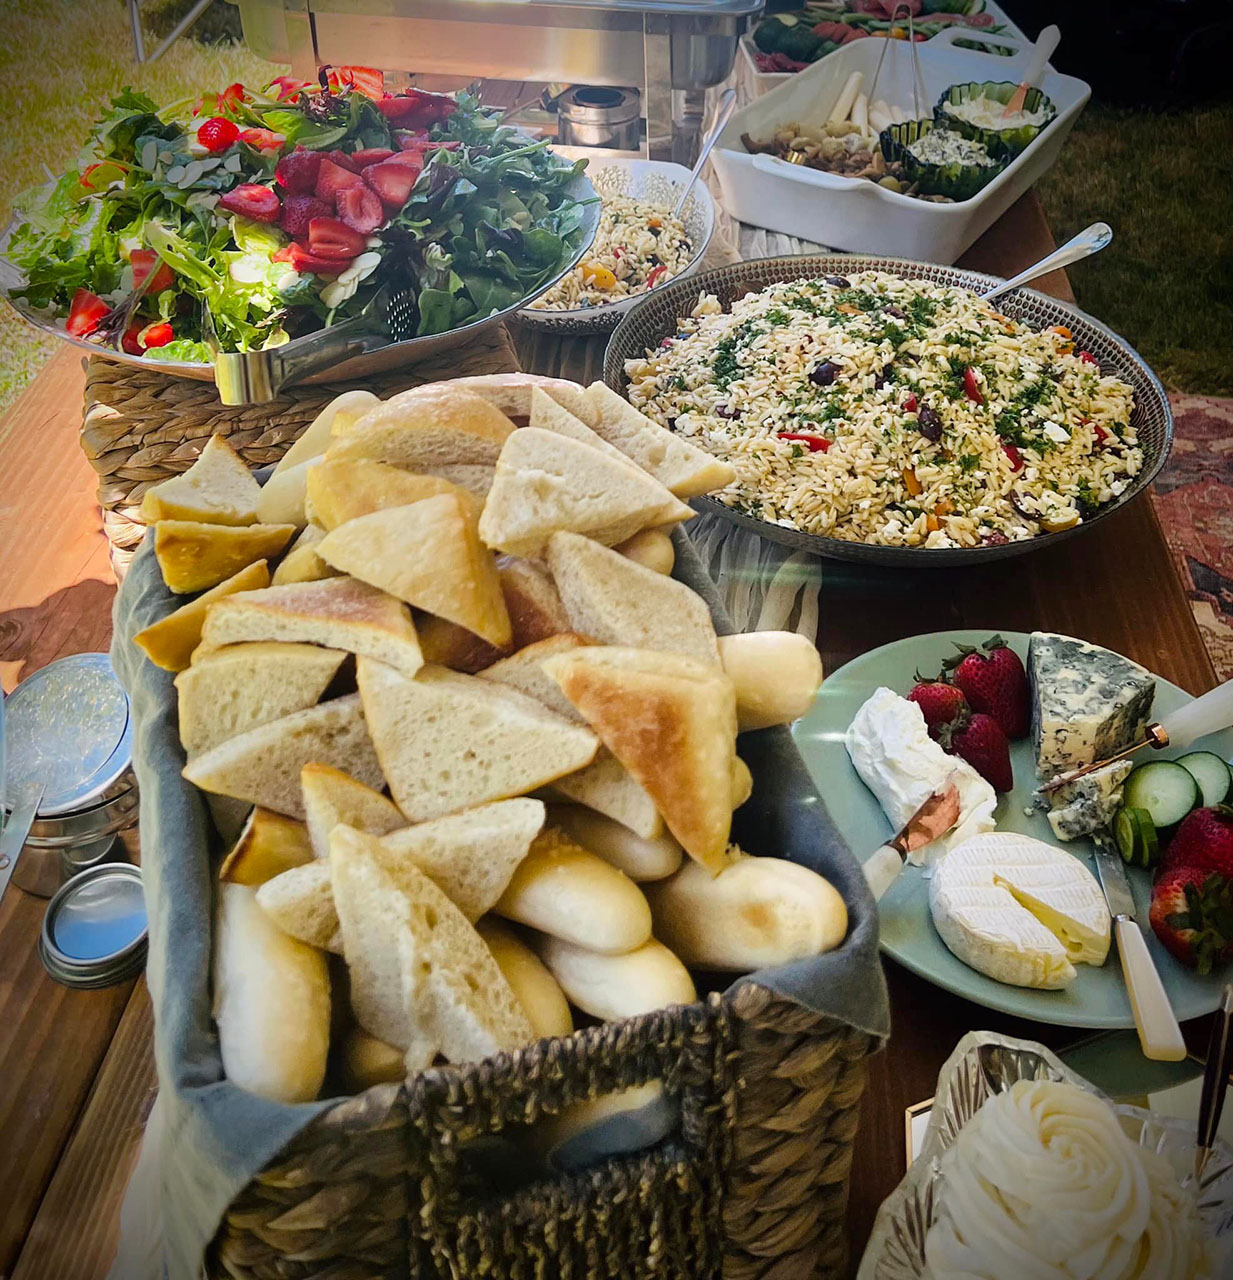 Catering by Divine South Kitchen and Catering in Gold Beach, Oregon